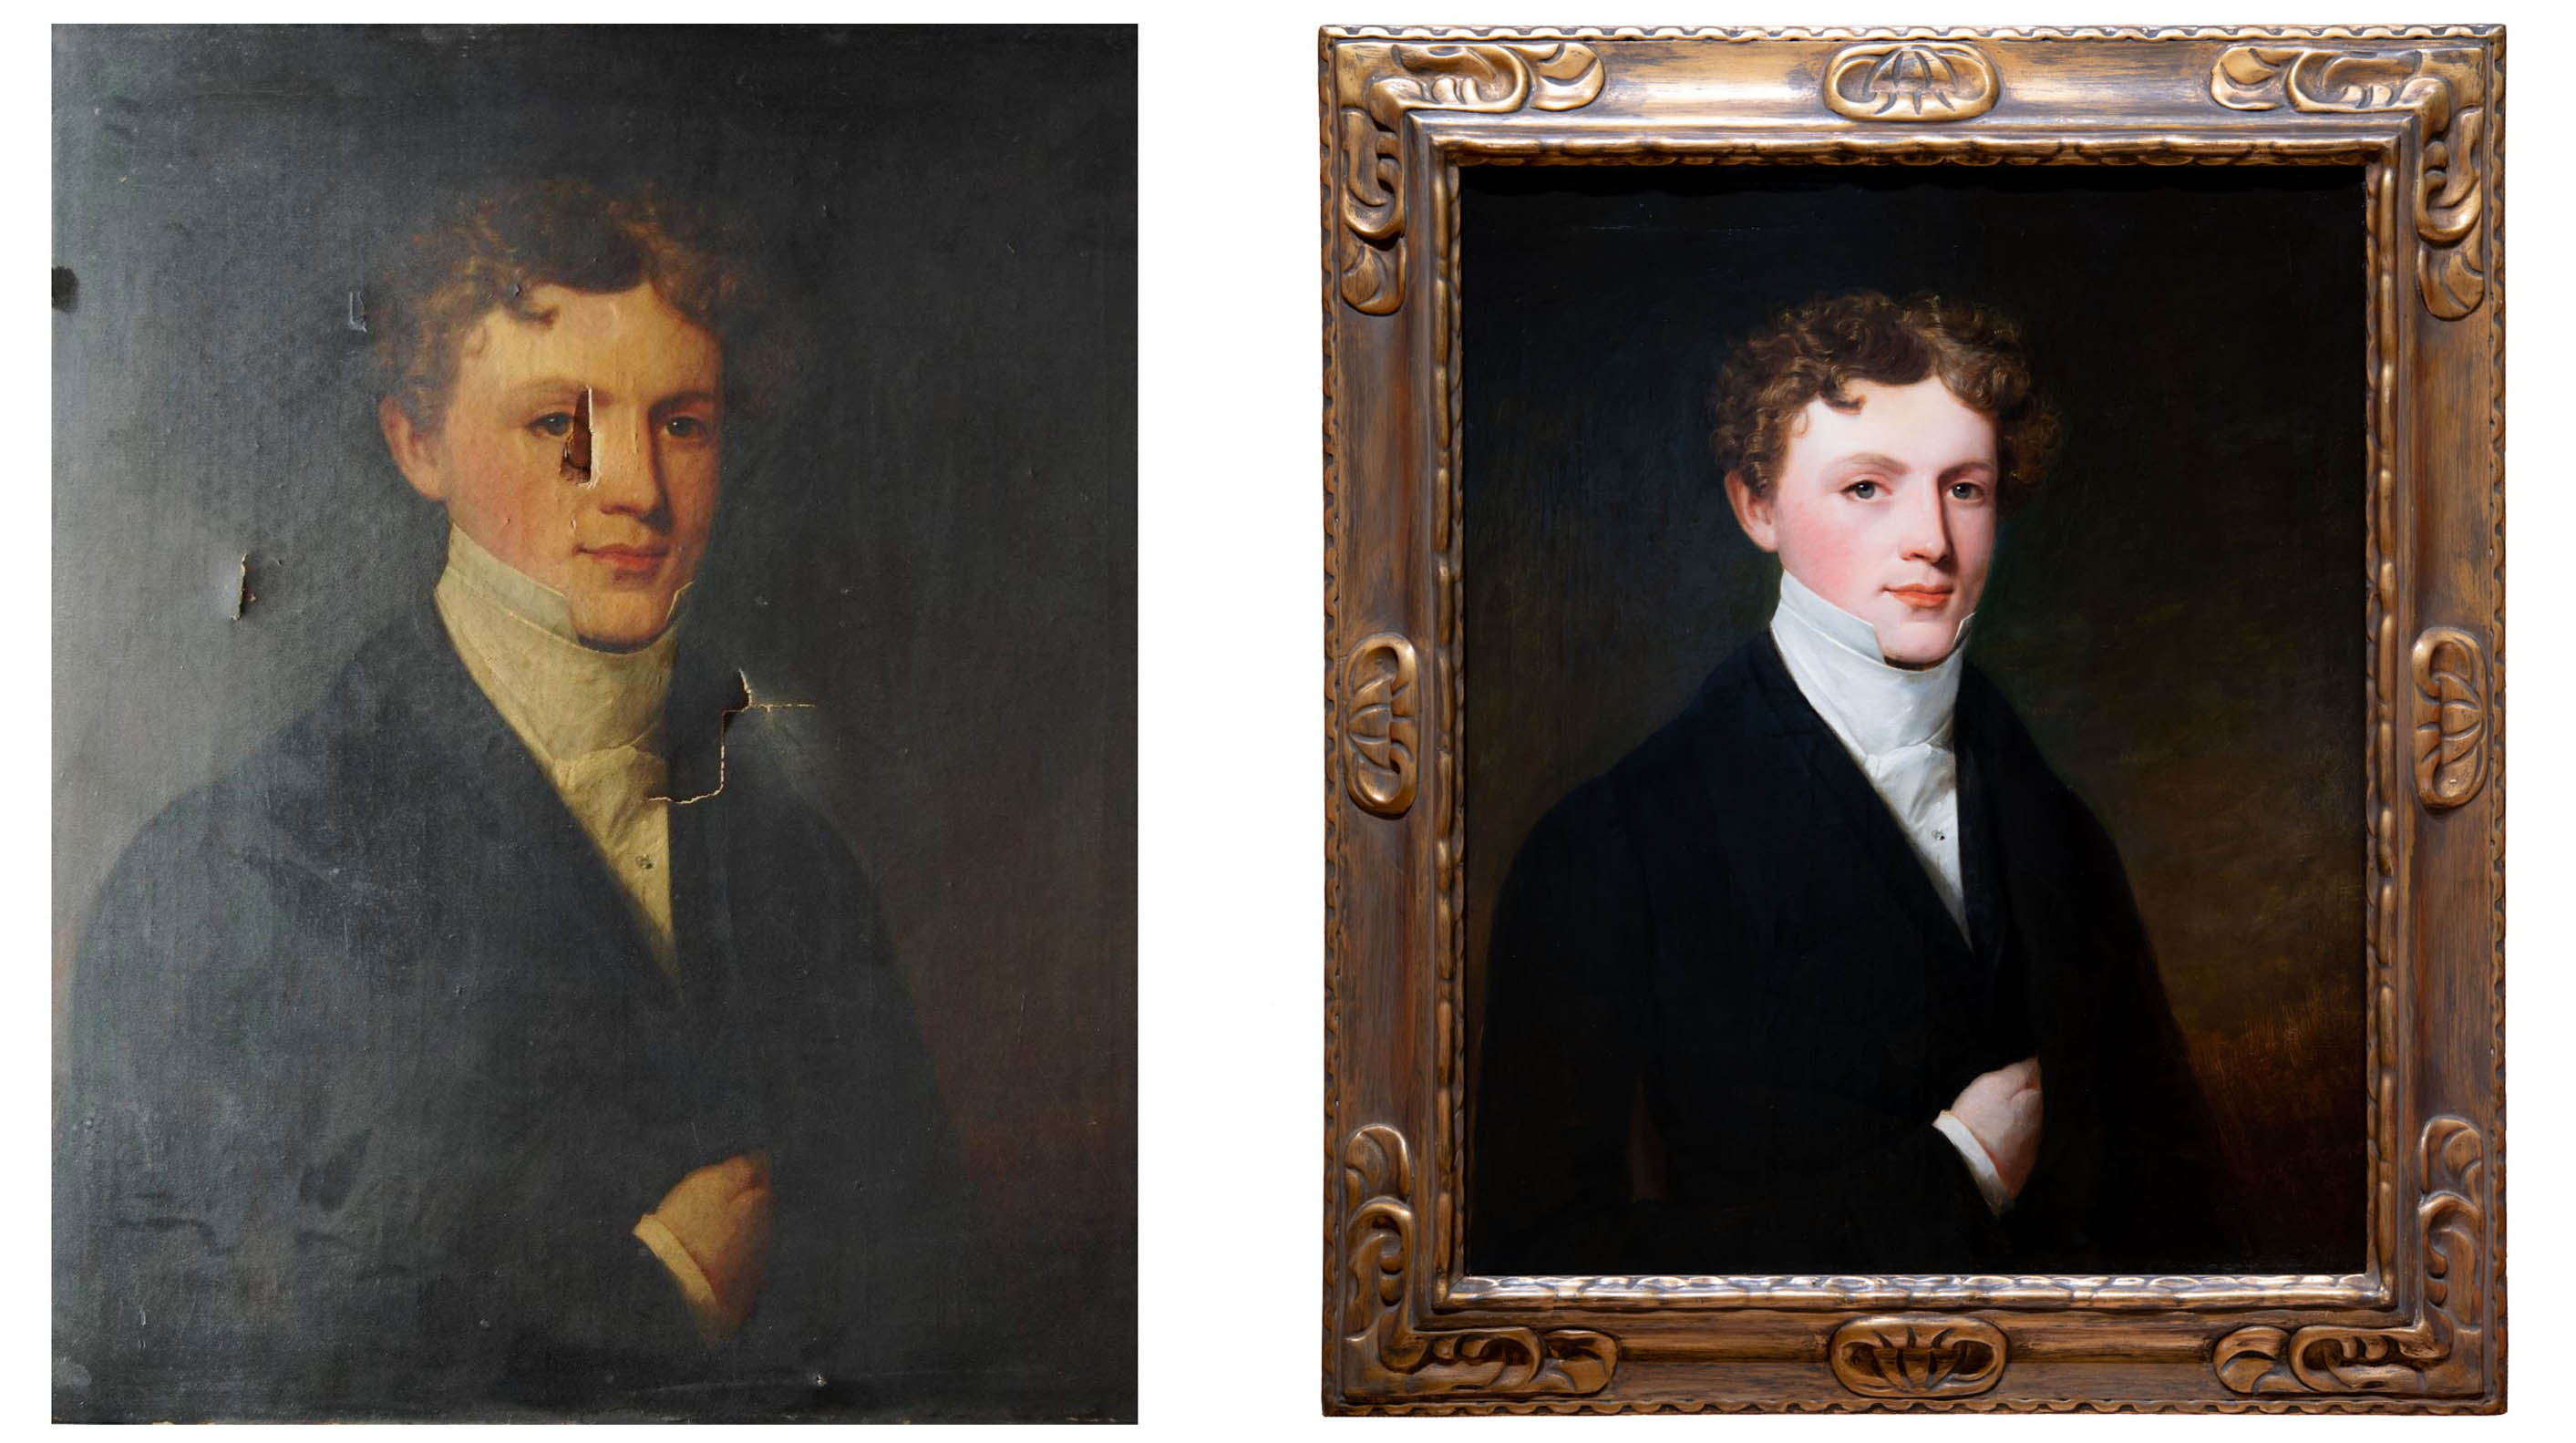 The painting before, and after conservation work.